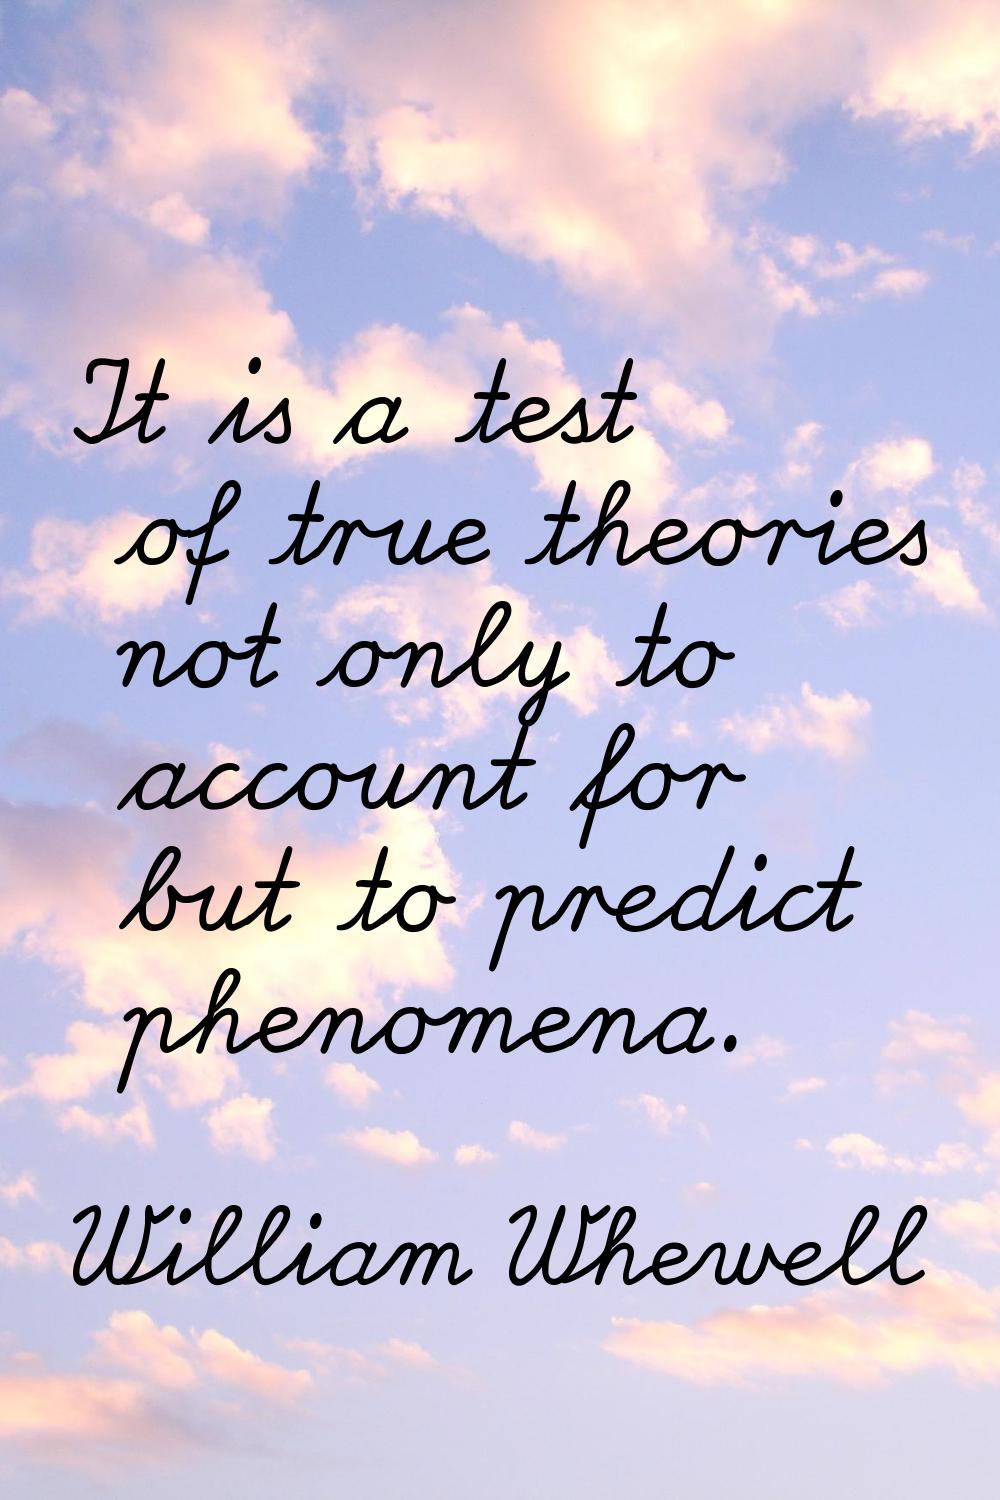 It is a test of true theories not only to account for but to predict phenomena.